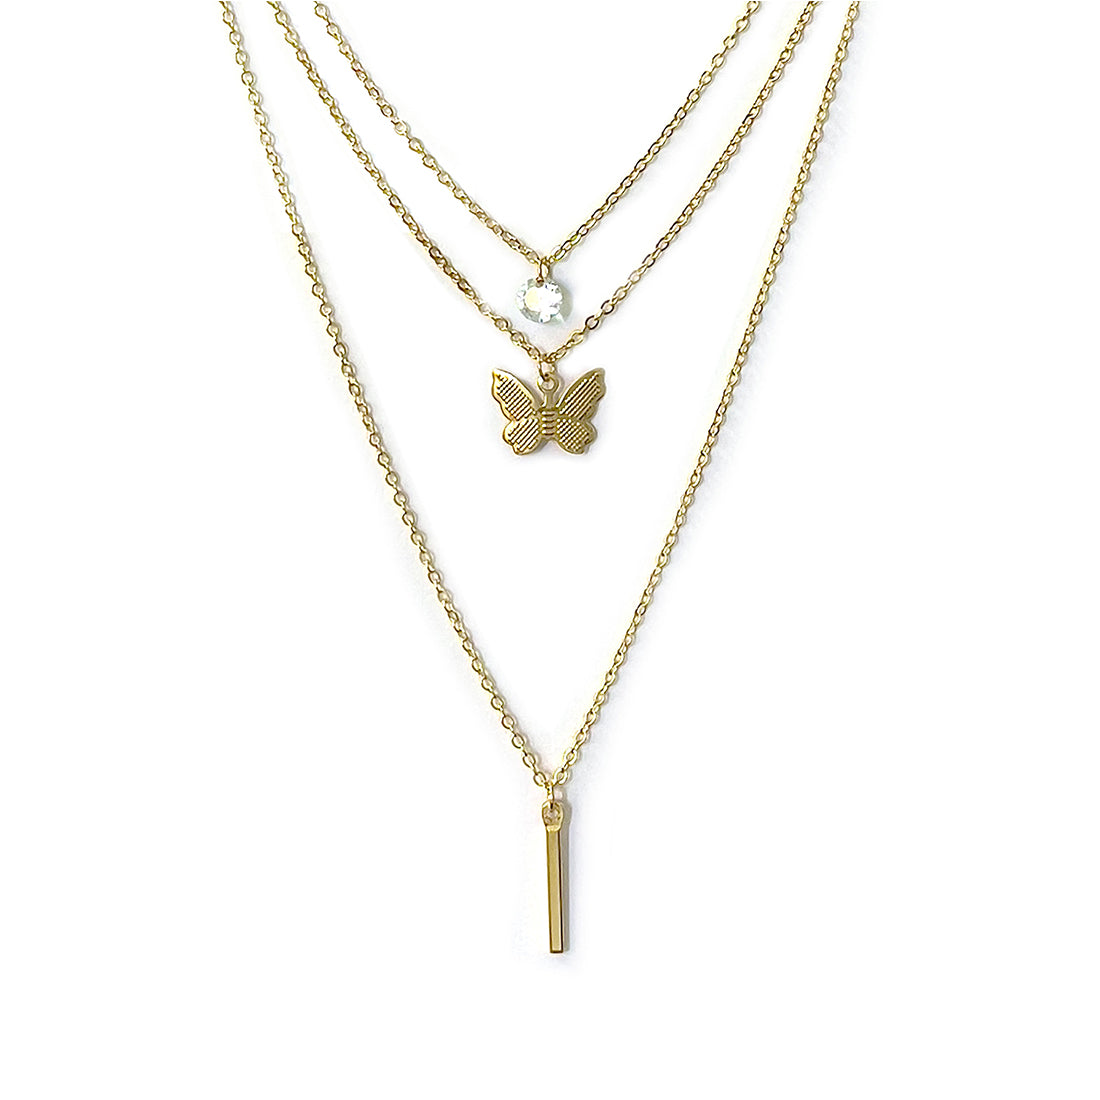 Contemporary Chain Link, Diamante Stud, Butterfly & Bar Pendant Gold-Toned Multi-Layered Necklace